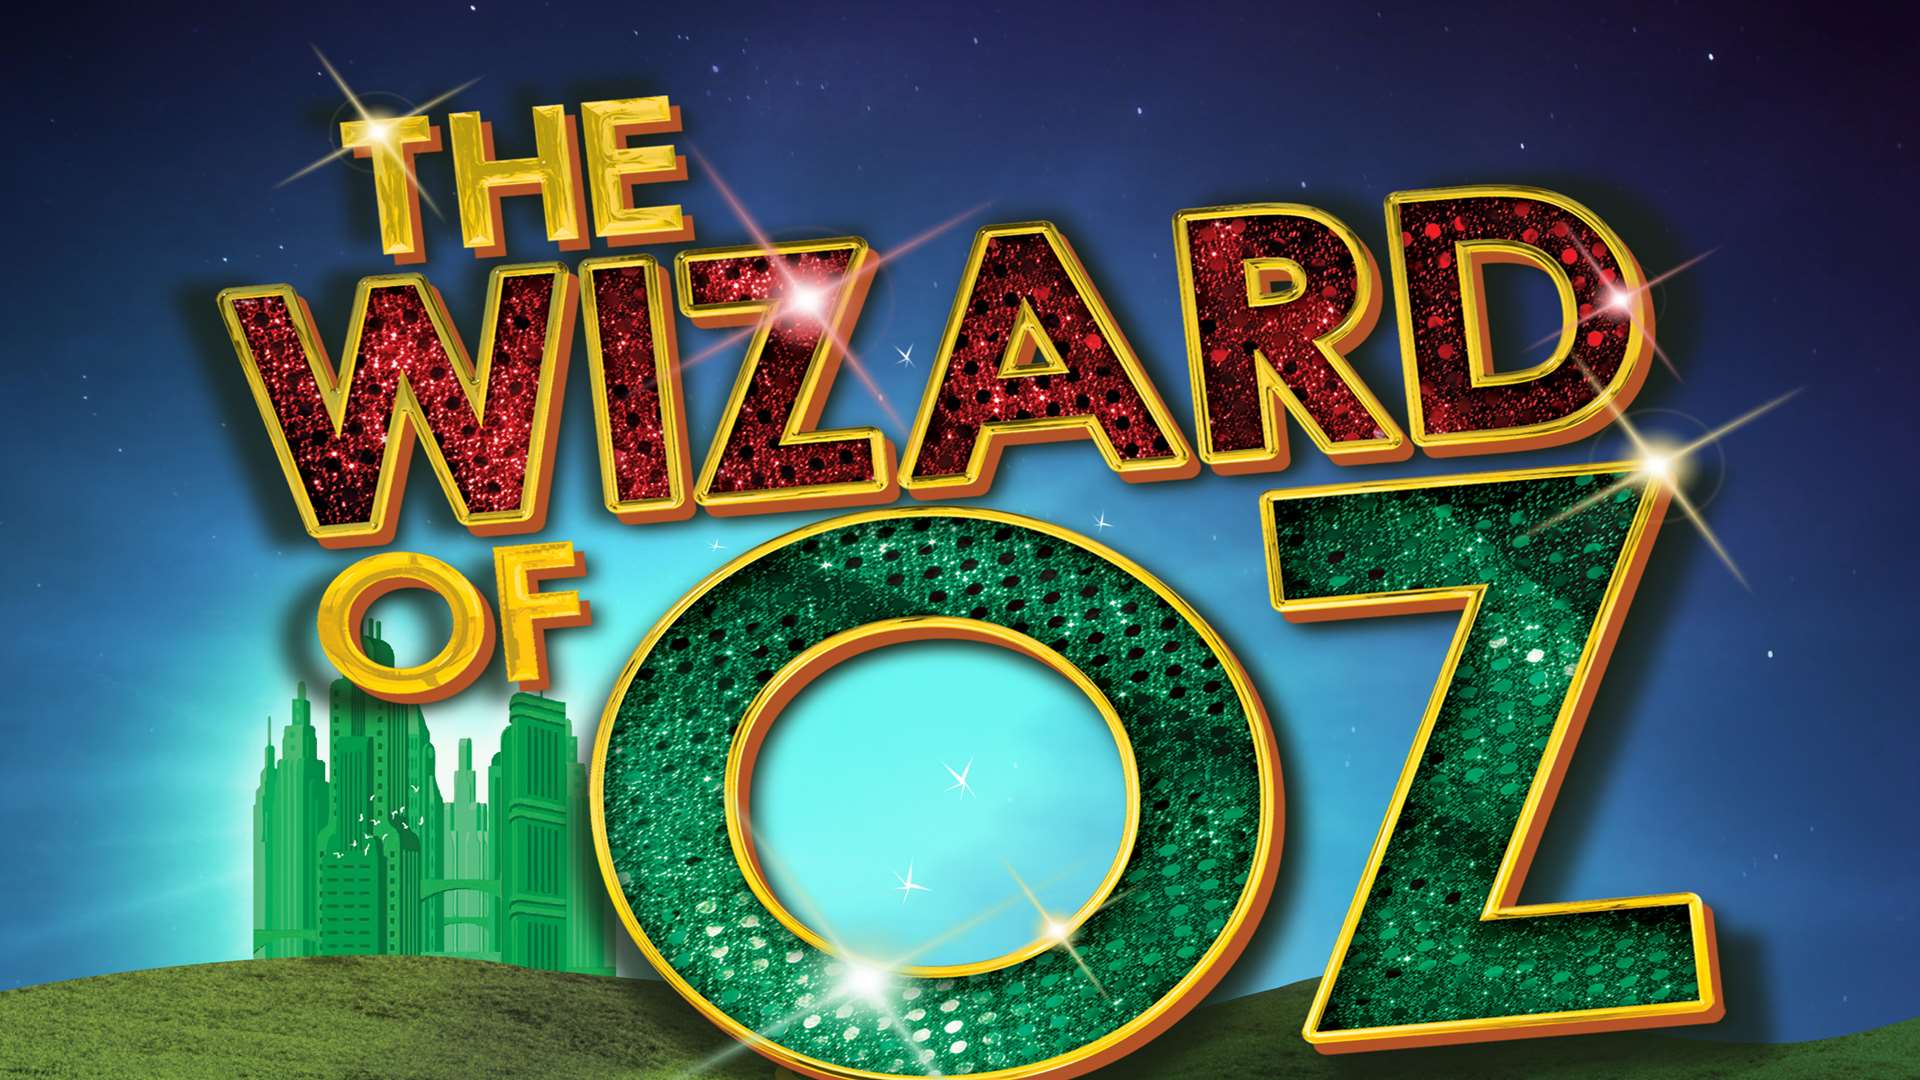 The Wizard of Oz panto will be in Margate this Christmas